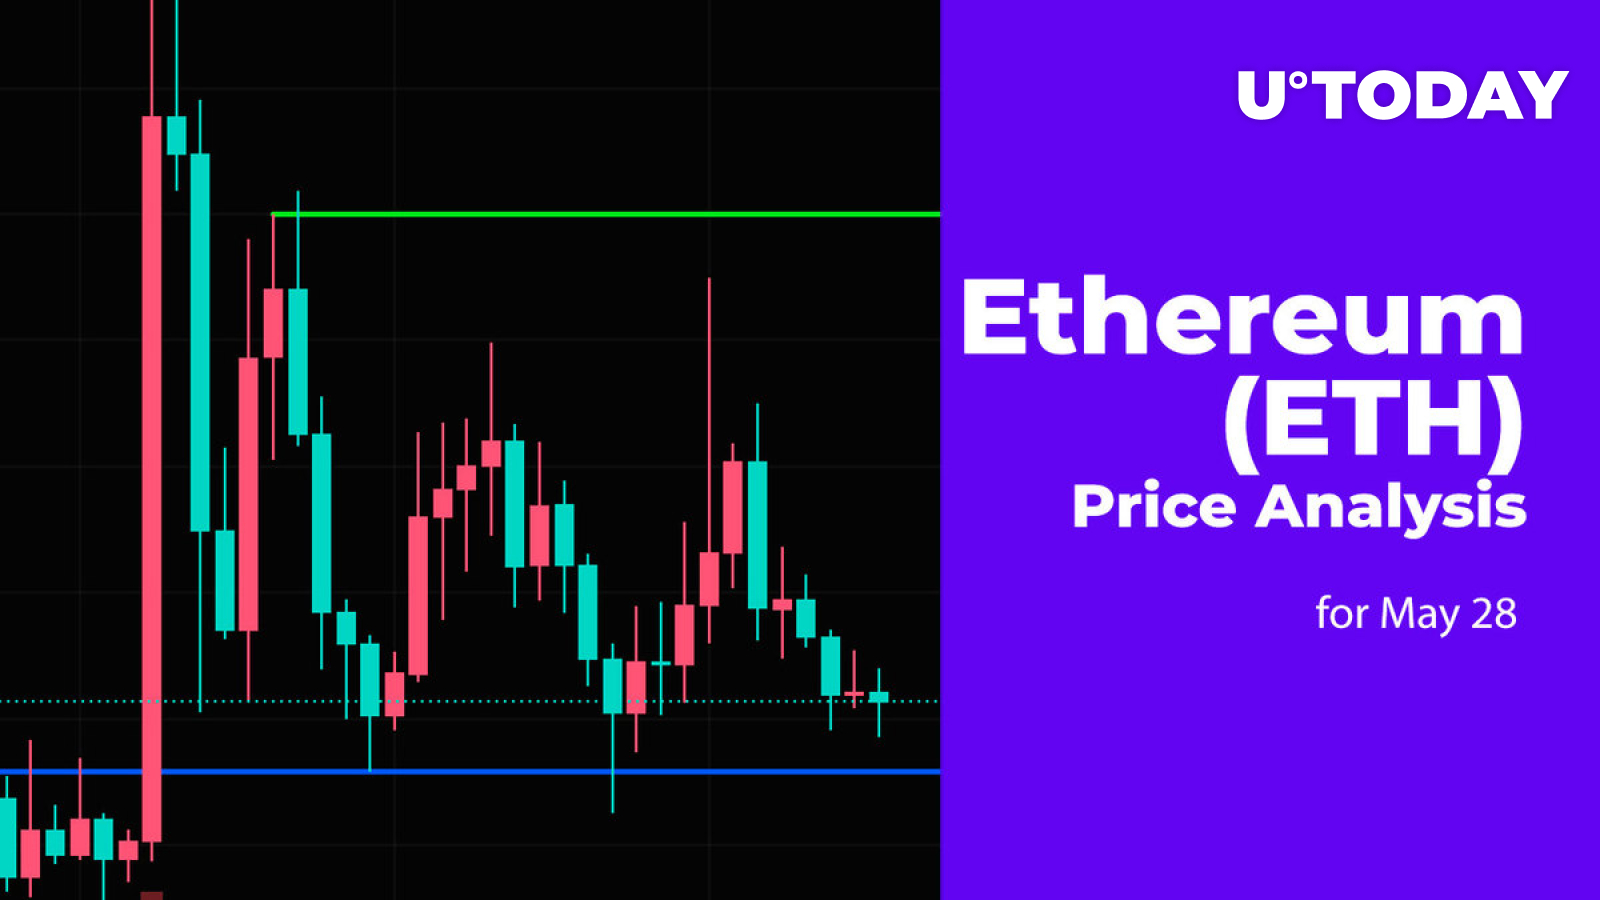 Ethereum (ETH) Price Analysis for May 28